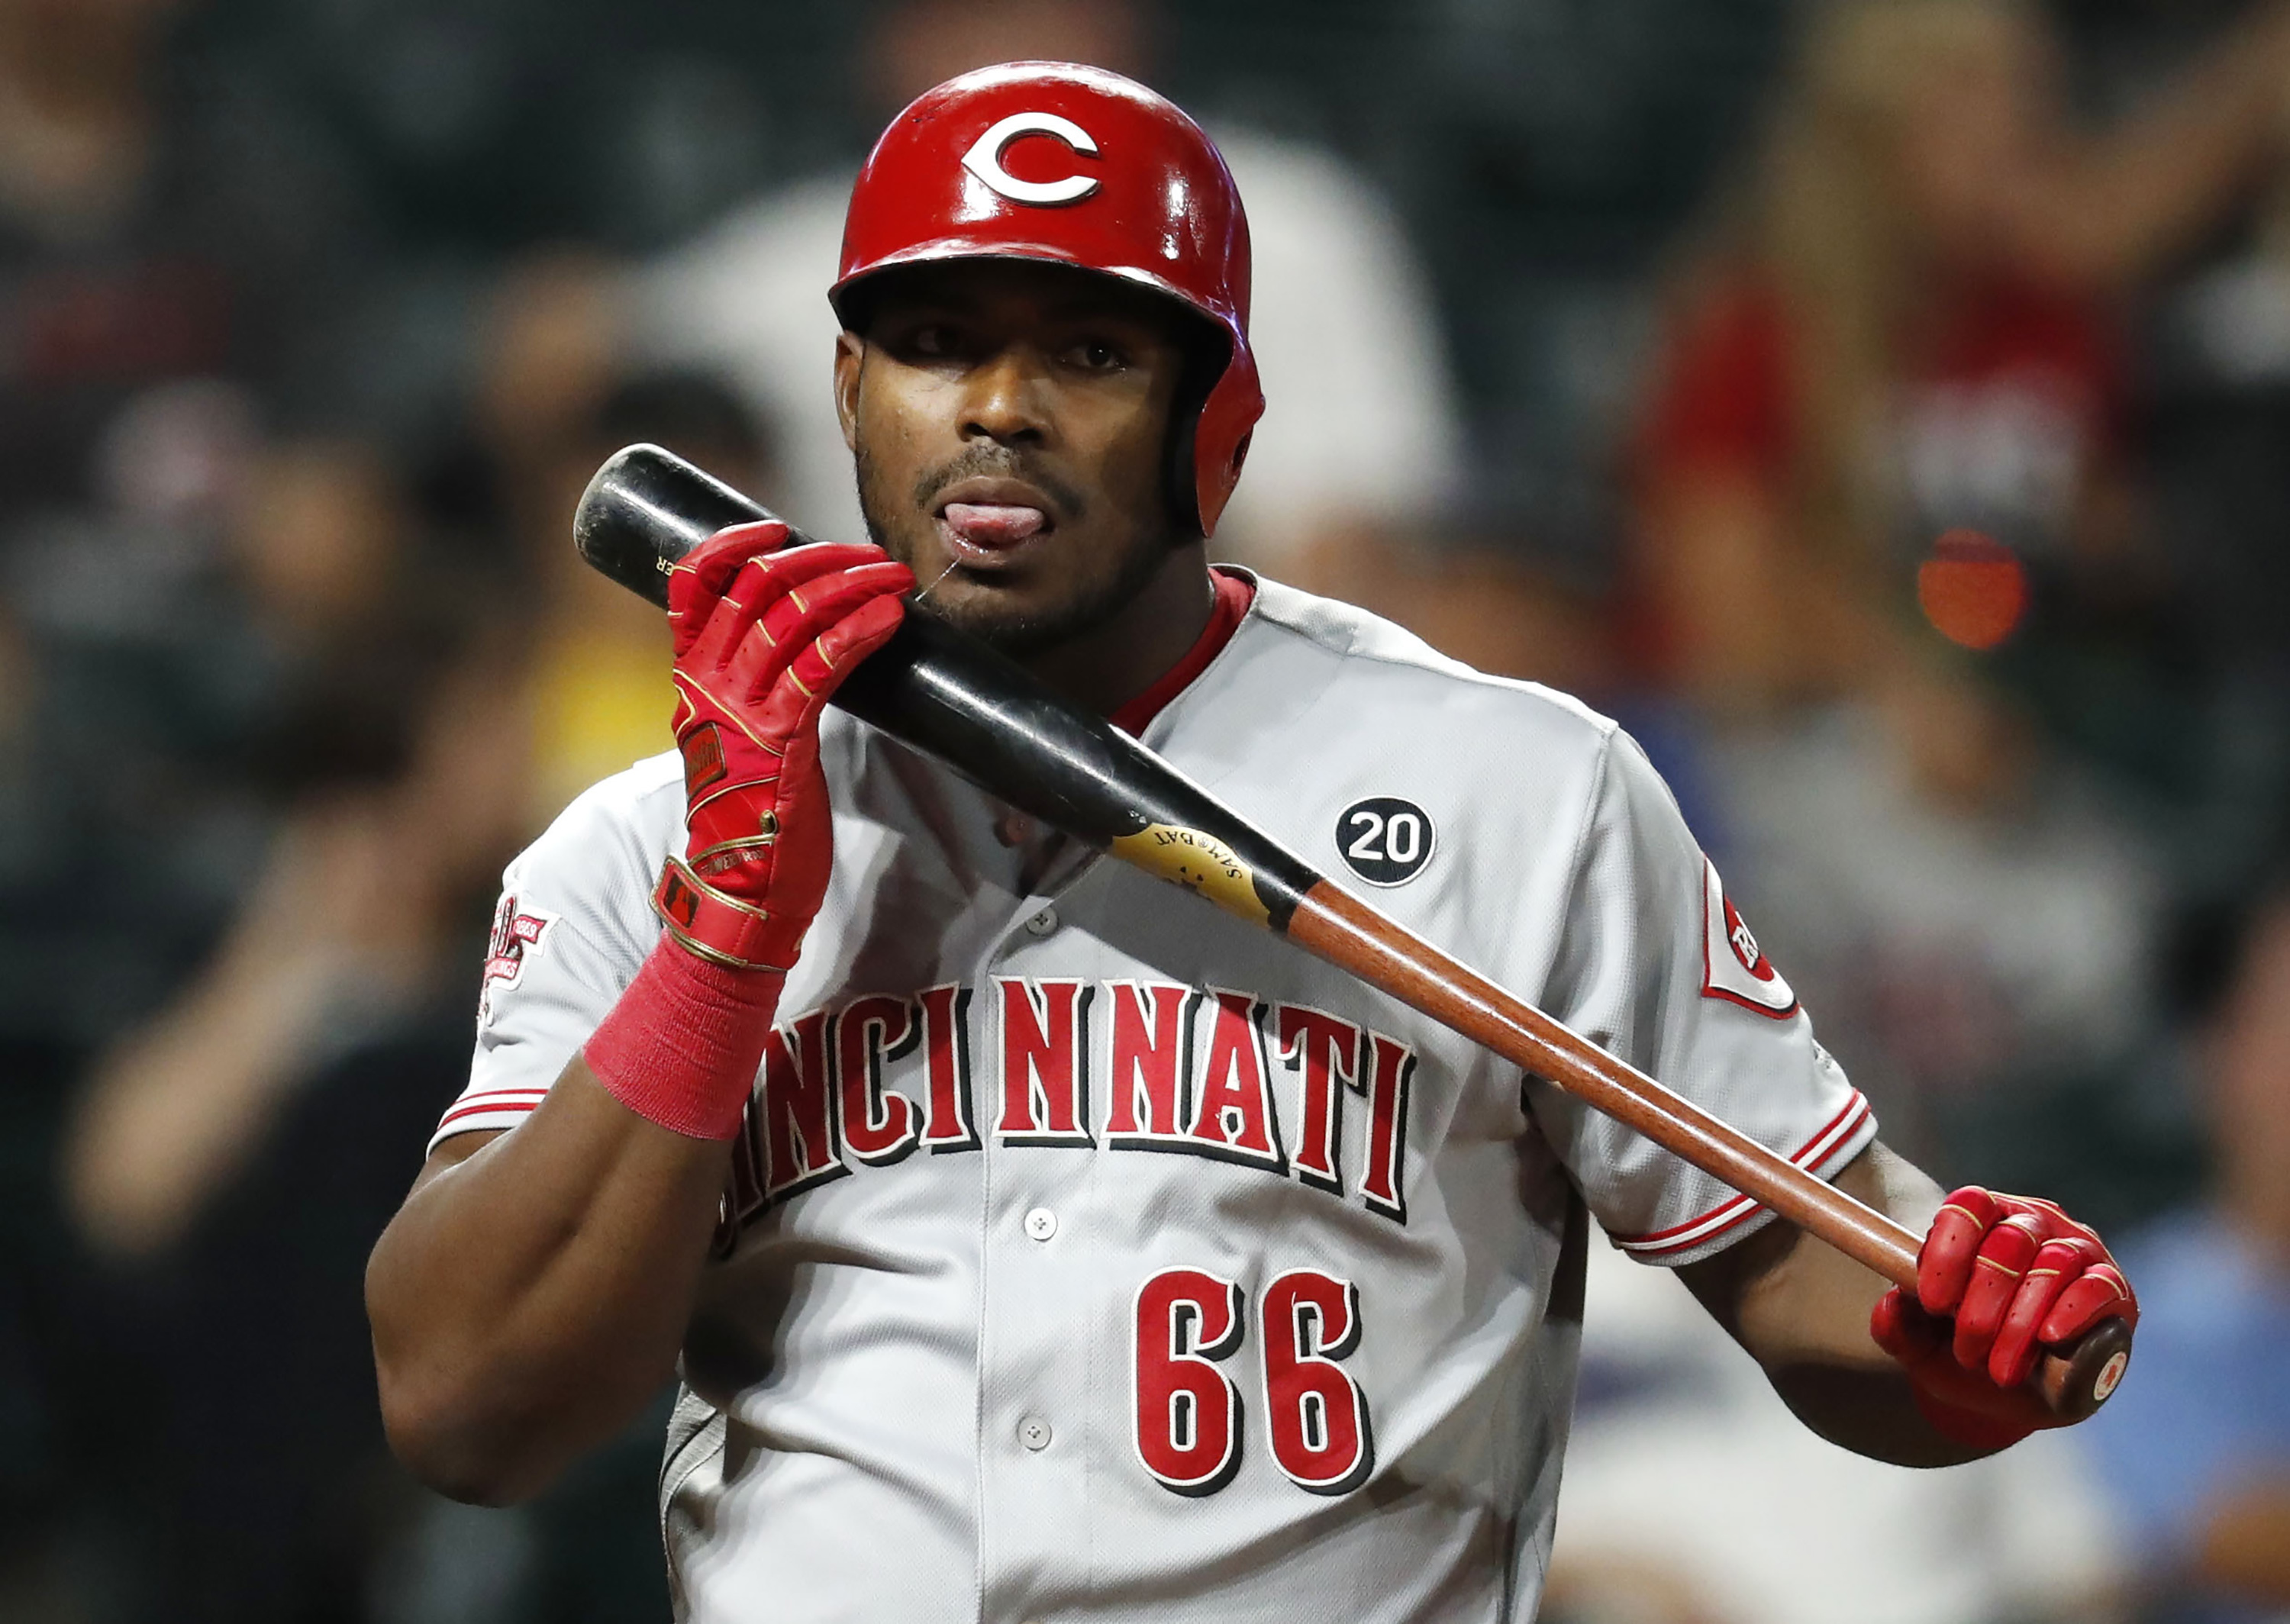 Ervin ties Reds' record with 6 hits in 17-9 win over Rockies